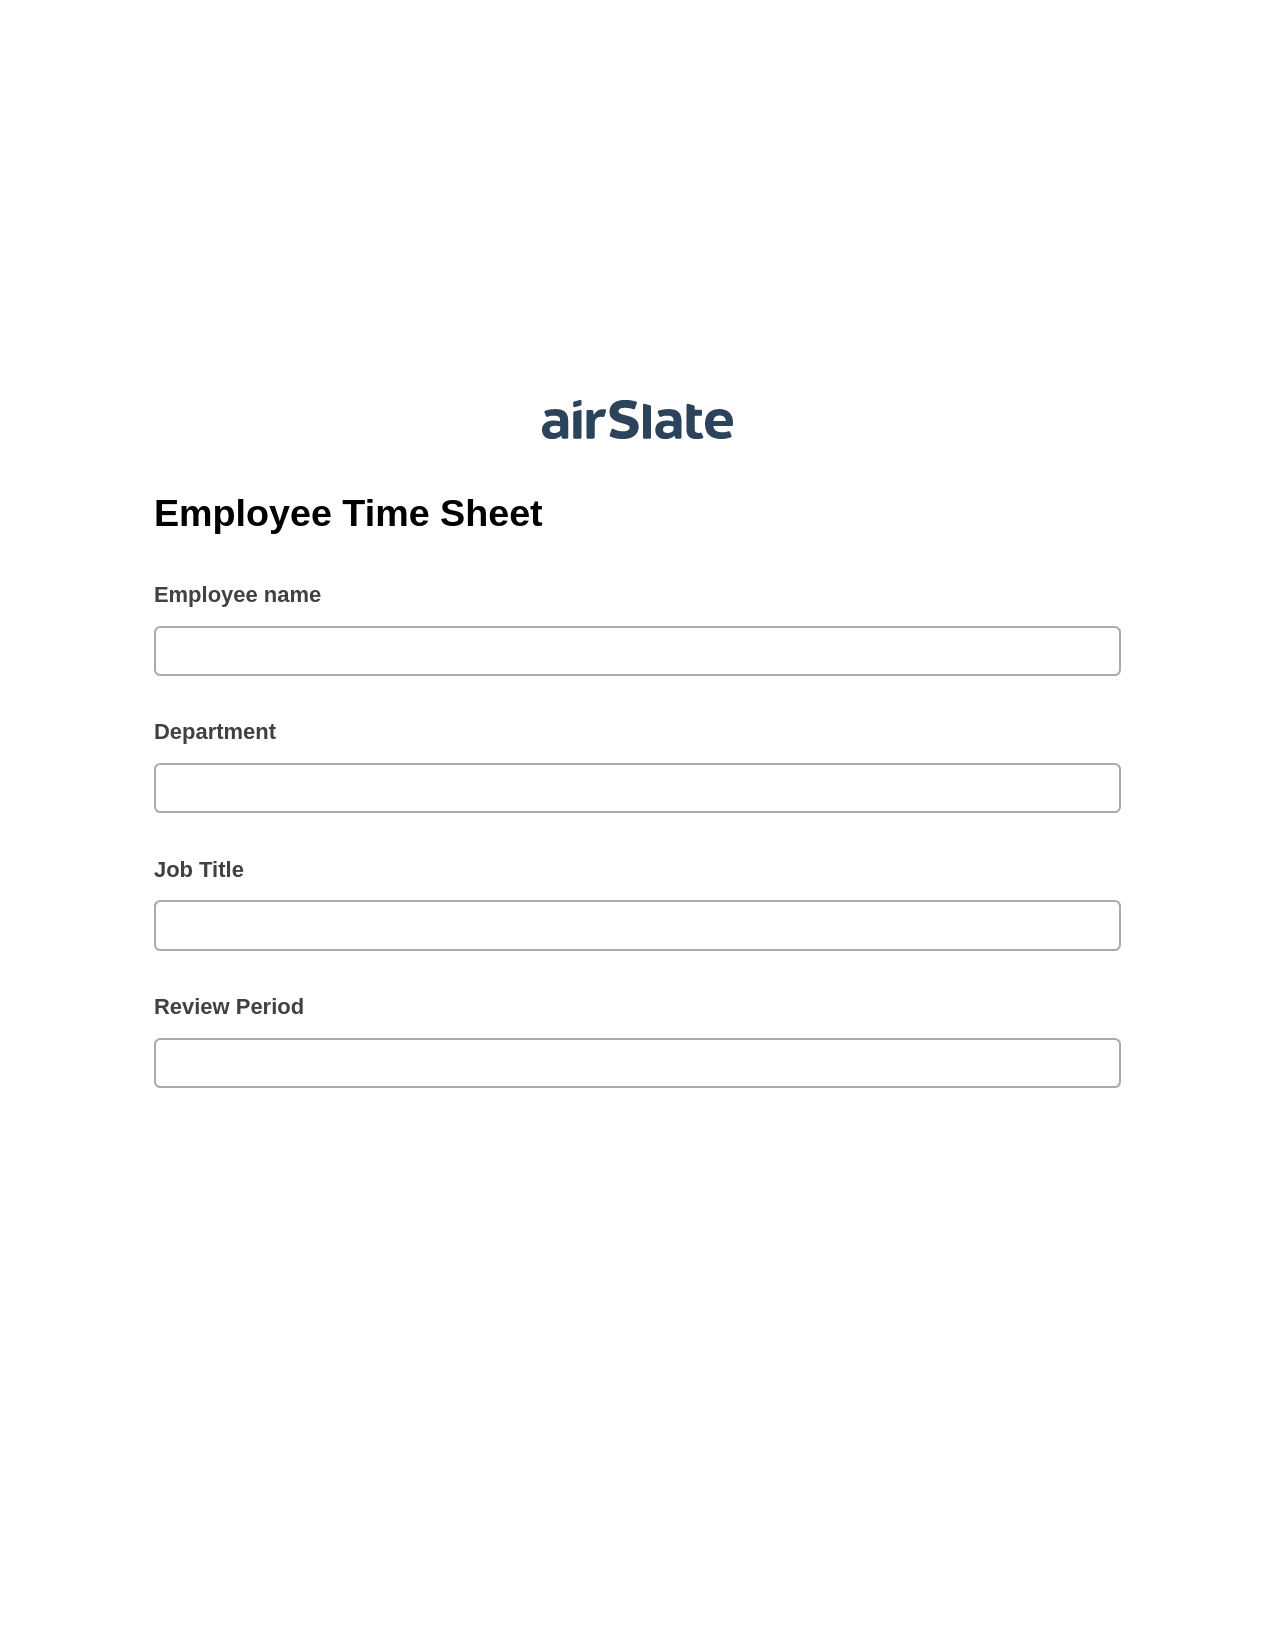 Multirole Employee Time Sheet Pre-fill from MySQL Bot, Mailchimp add recipient to audience Bot, Archive to Google Drive Bot